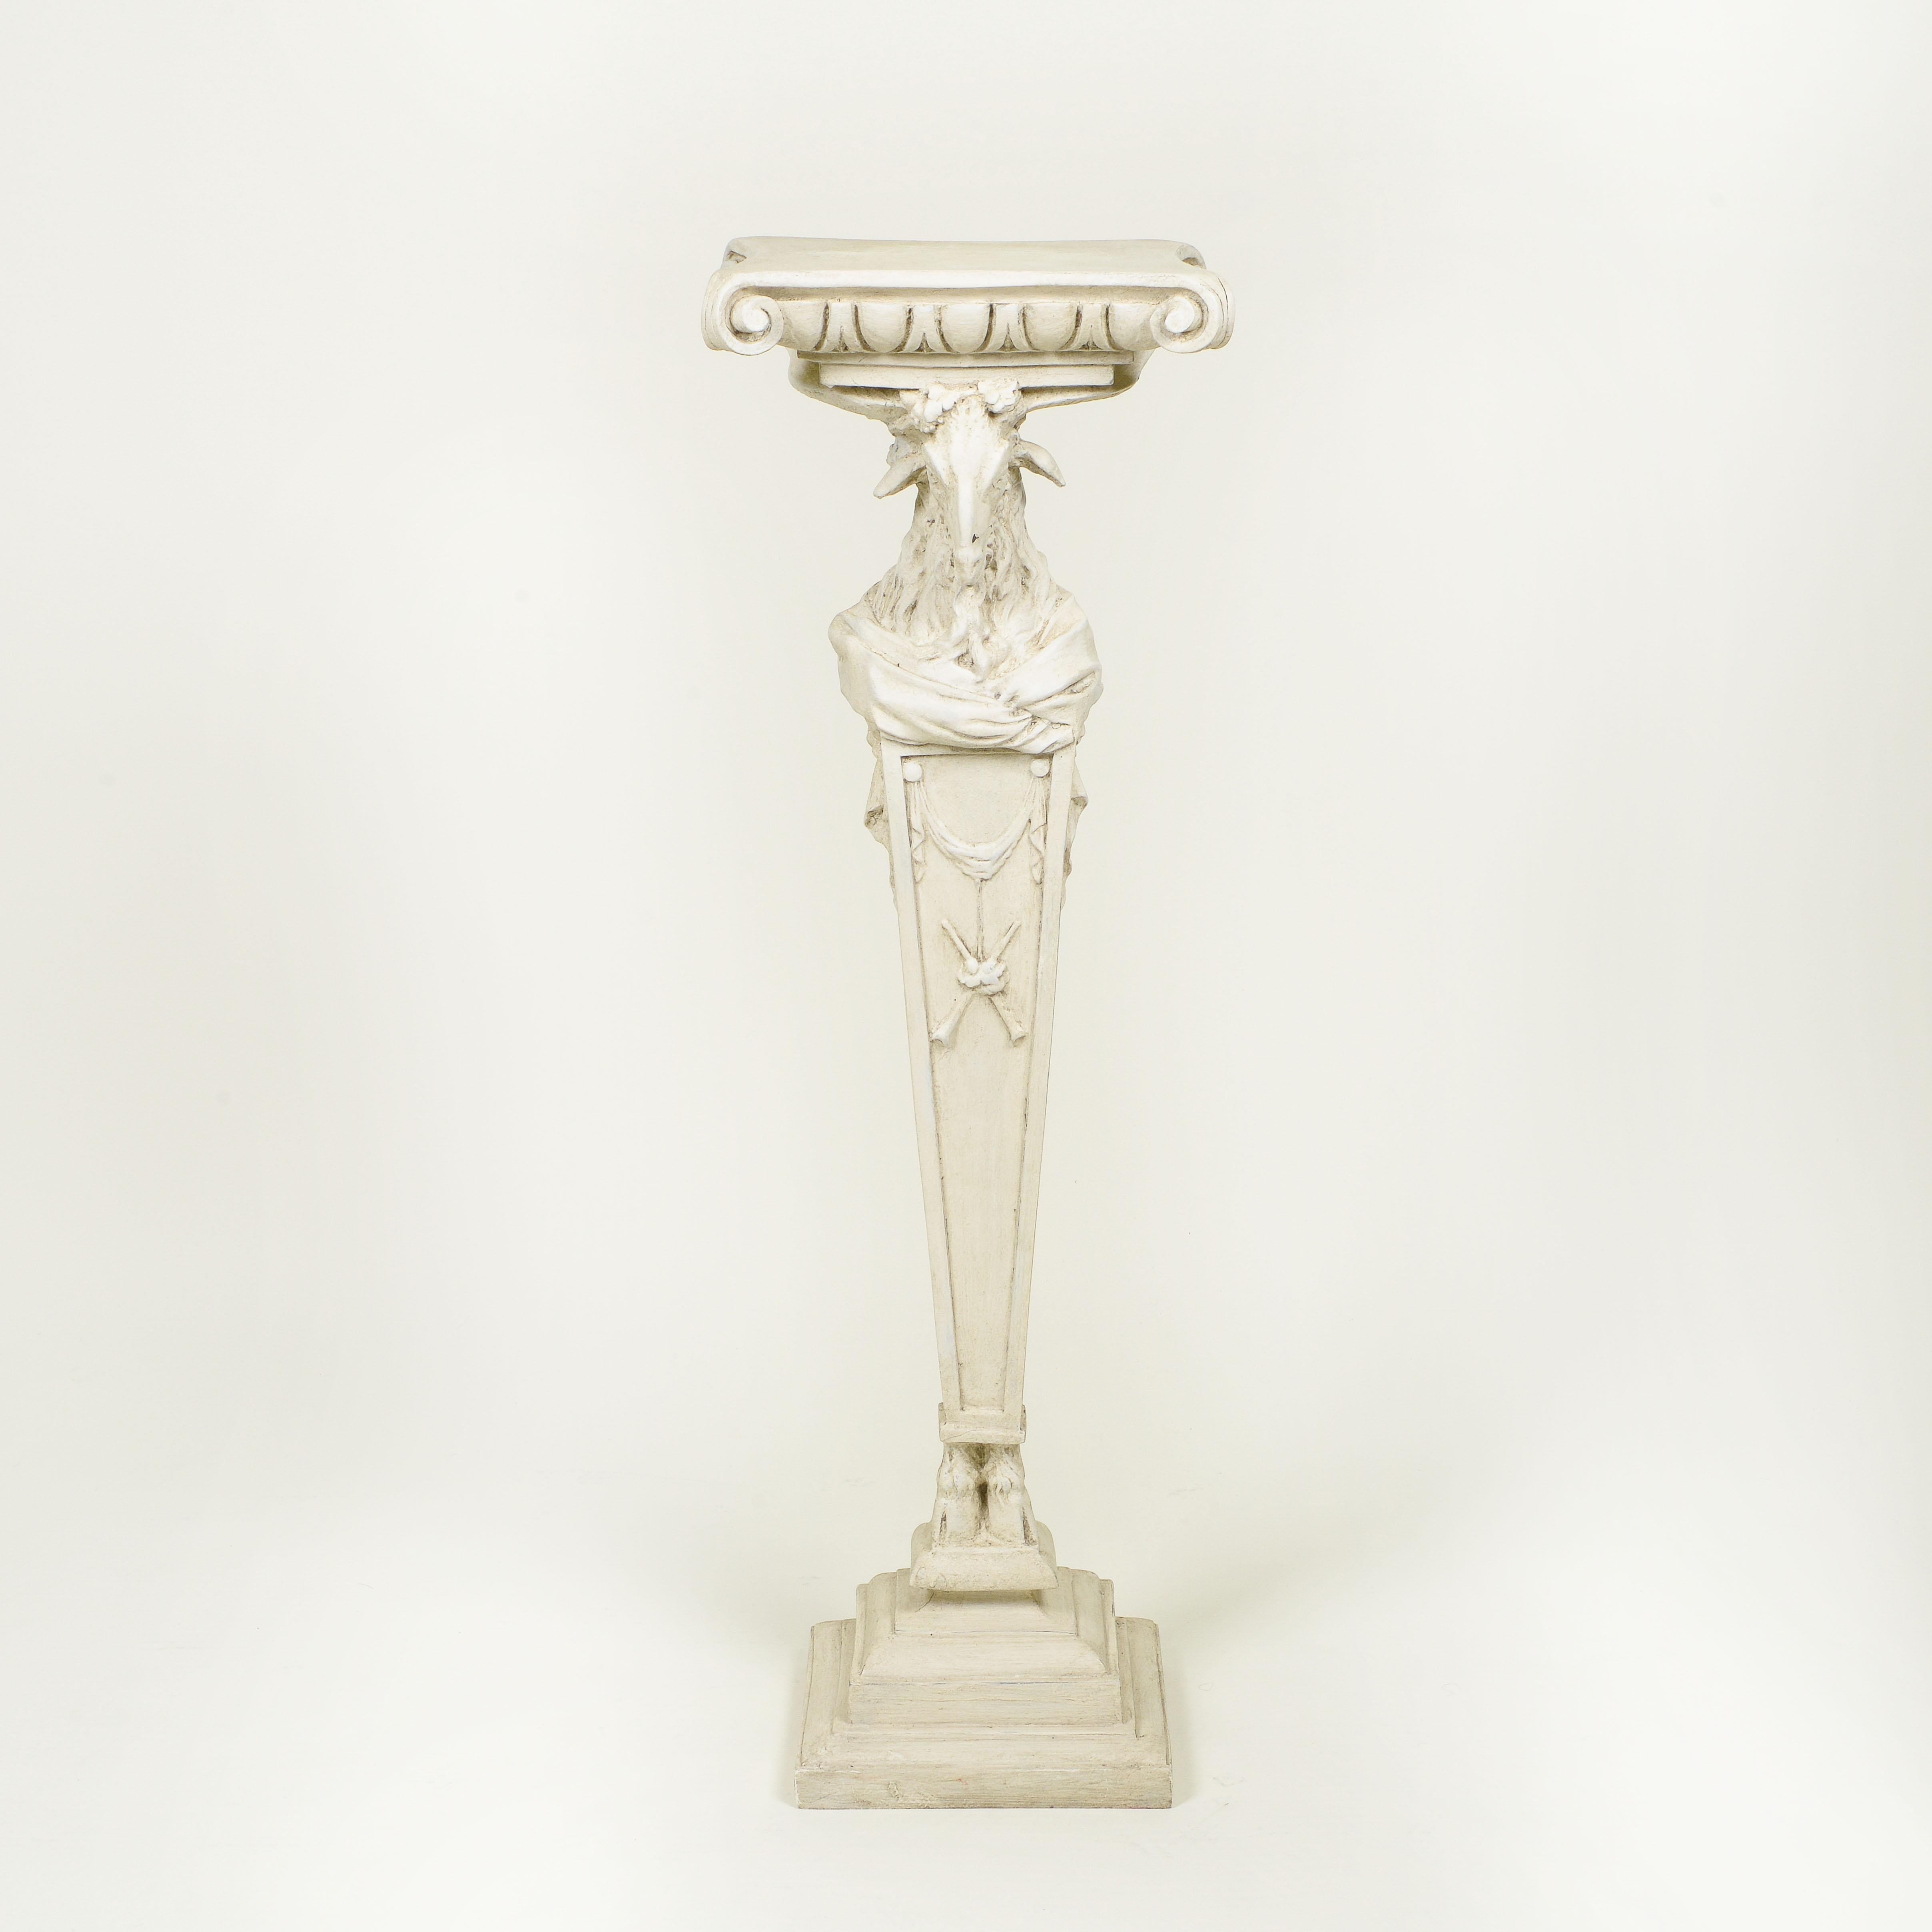 The square top carved in the form of an Ionic capital over ram's head supporting on a square tapering pedestal with drapery swag decoration.

Provenance: David Barrett